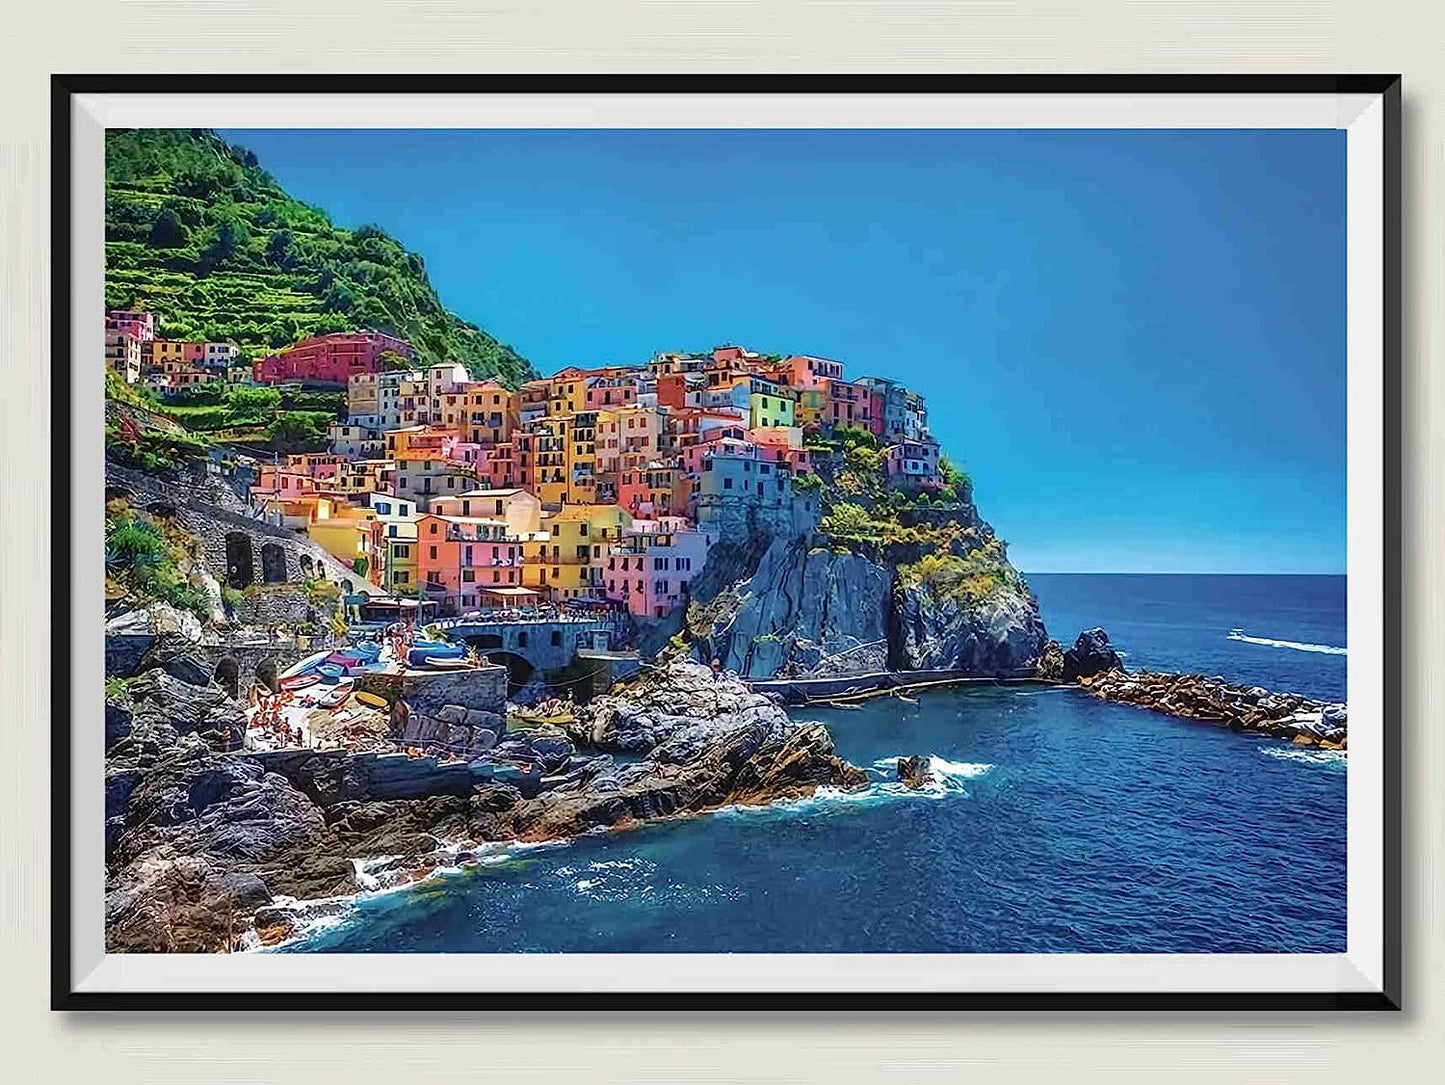 Village by The sea, 2000 Piece Wooden Puzzle, Jigsaw Puzzle Educational Game Home Decor Puzzle